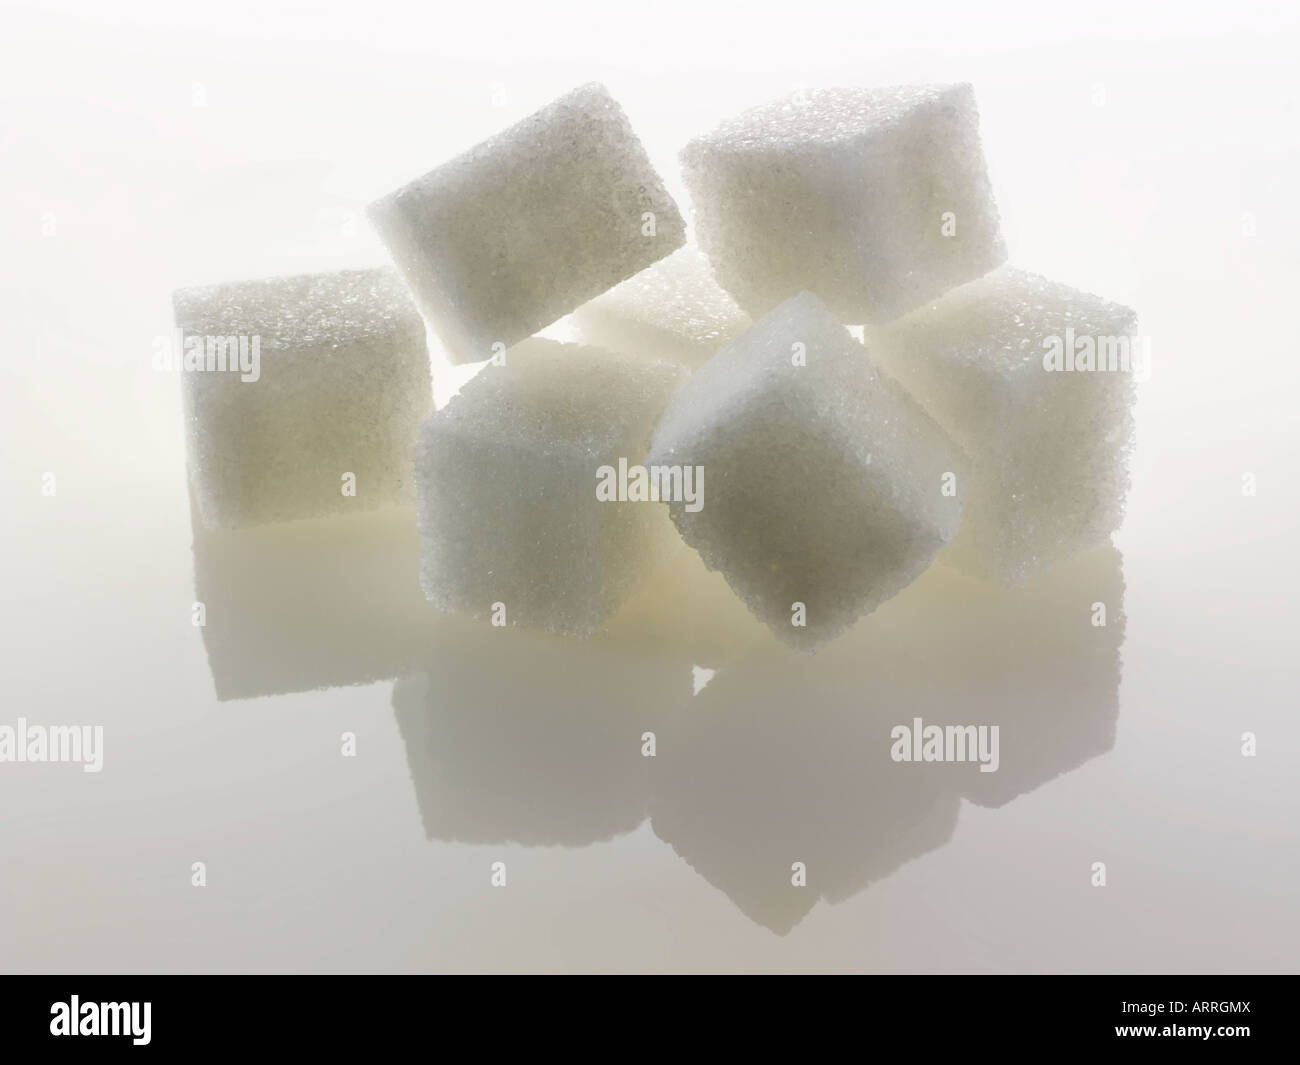 White refined Sugar cubes  against a white background Stock Photo